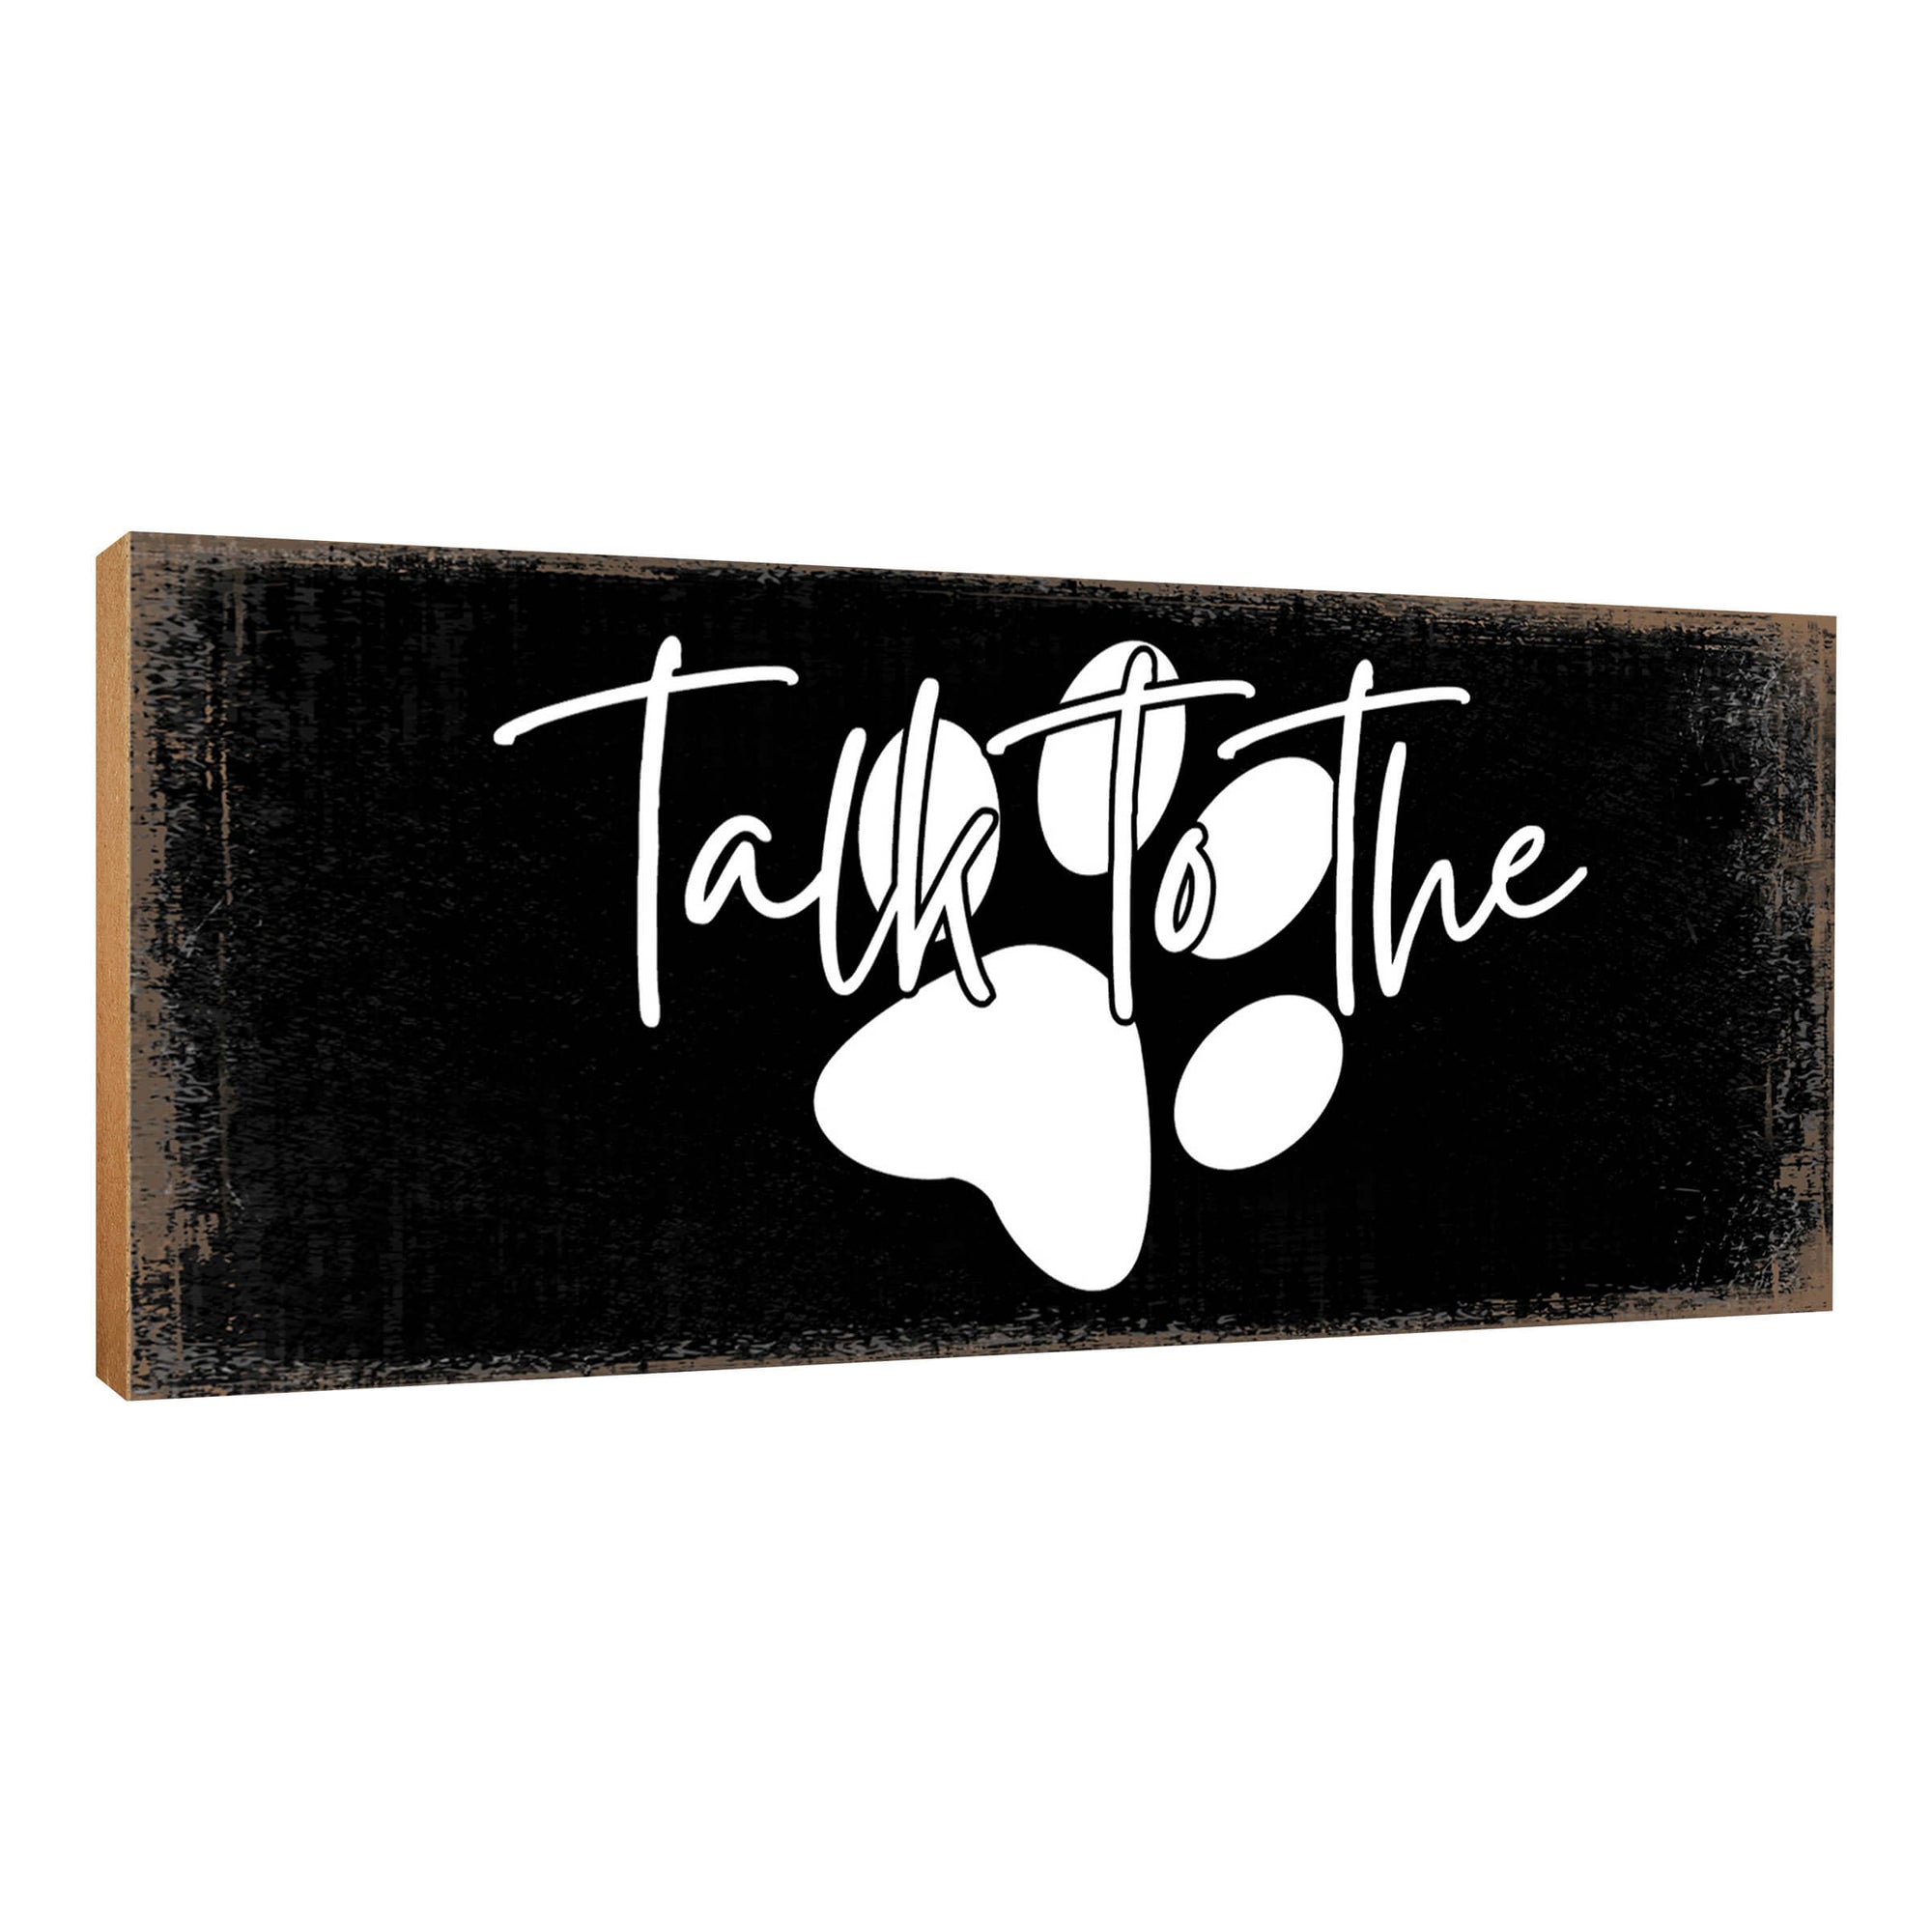 Wooden Shelf Decor and Tabletop Signs with Pet Verses - Talk To The